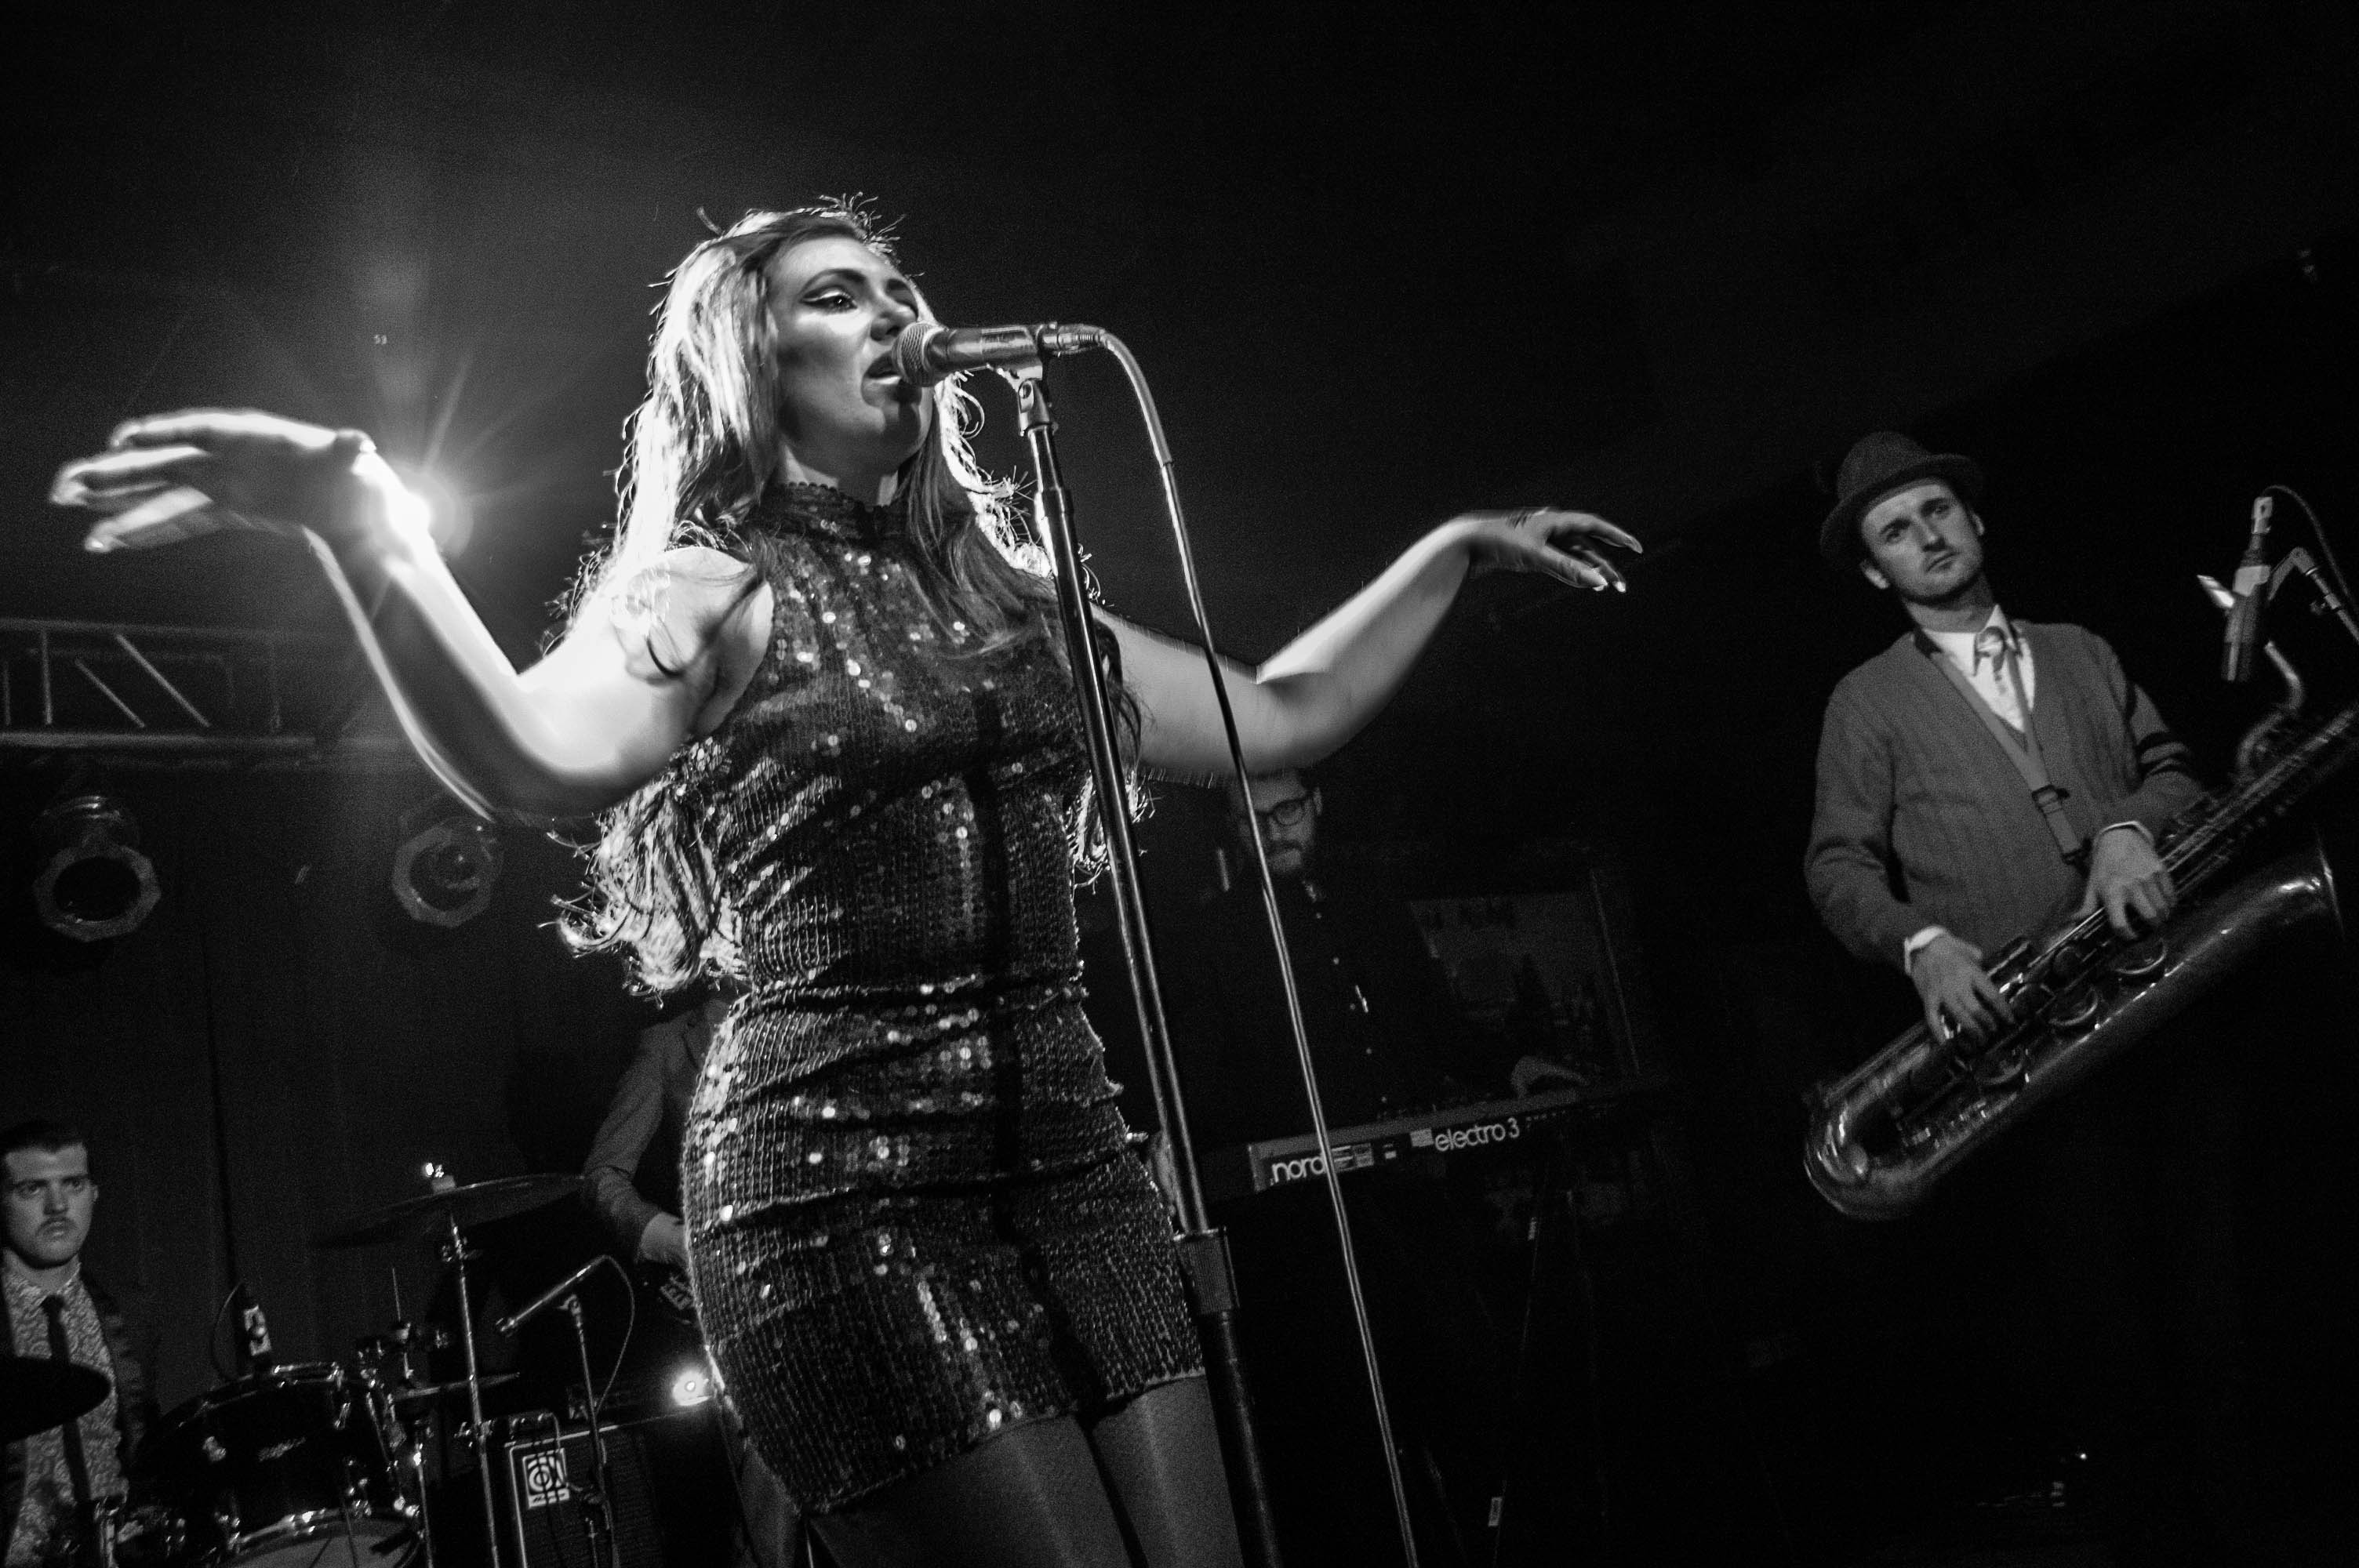 Clairy Browne & the Bangin' Rackettes at House of Blues Cambridge Room Dallas // Crystal Prather Photography